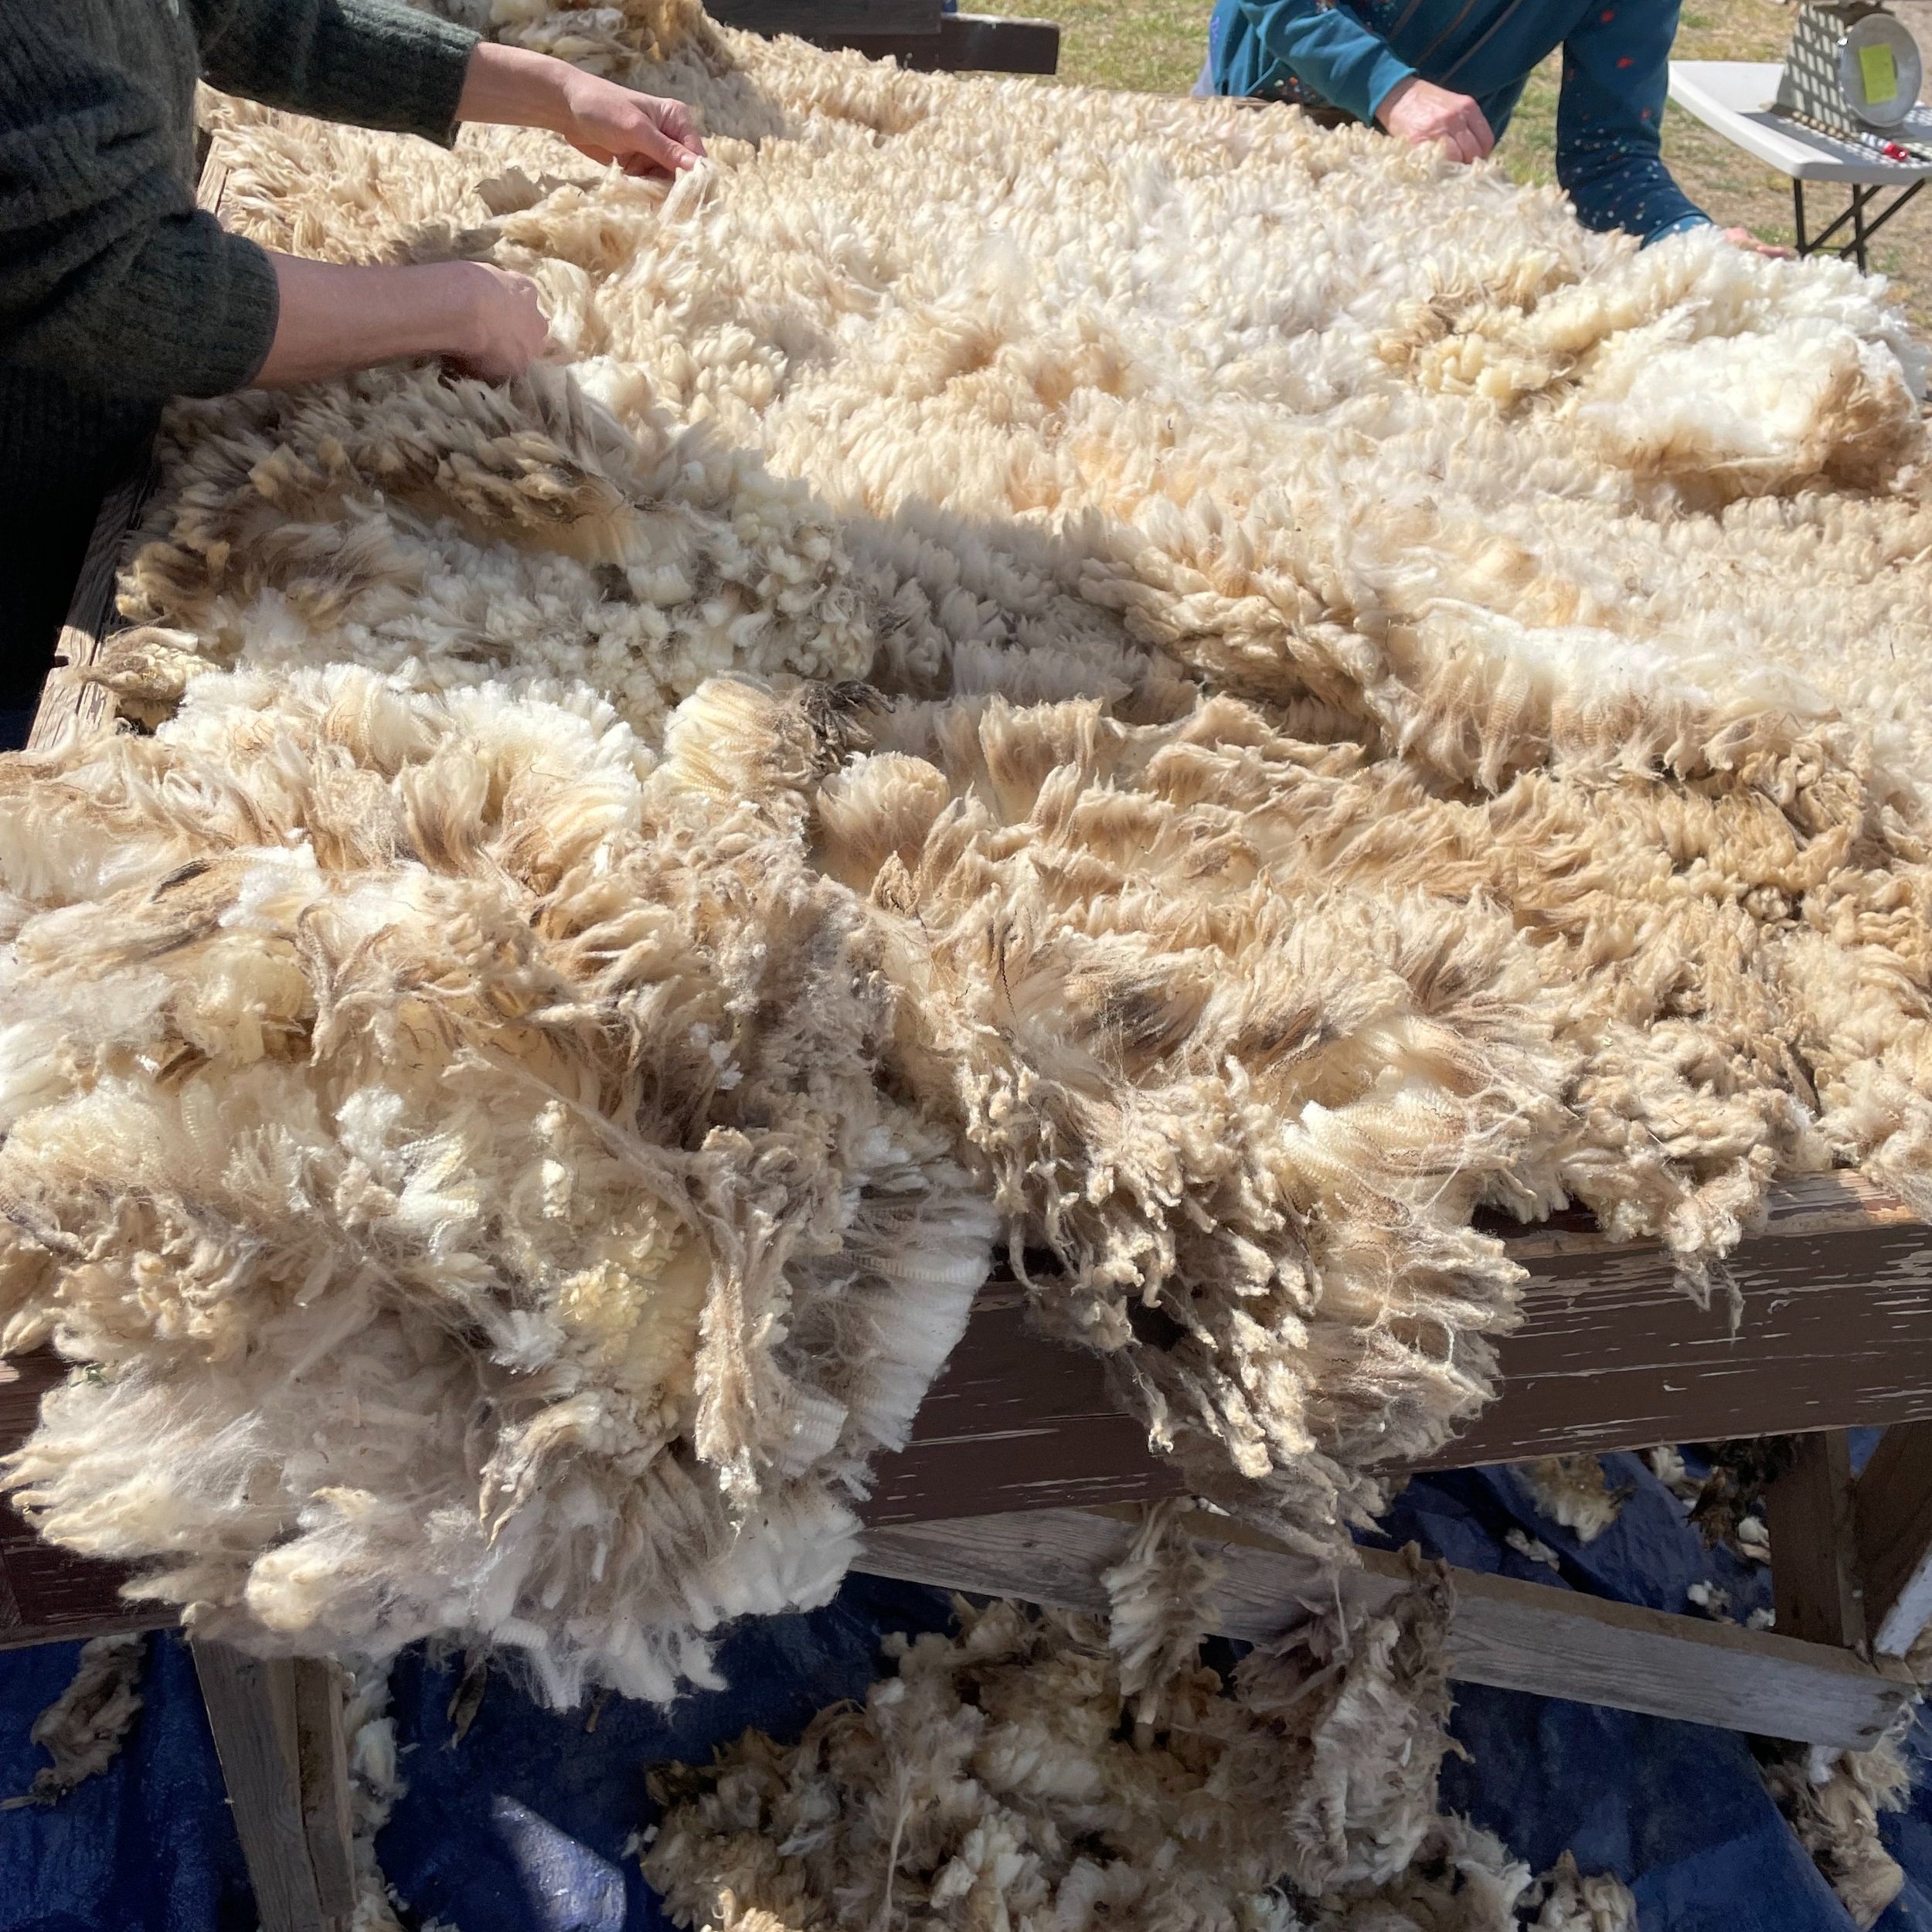 Skirting- Once shorn, the wool is checked and waste from poop or VM is tossed on the ground below. 